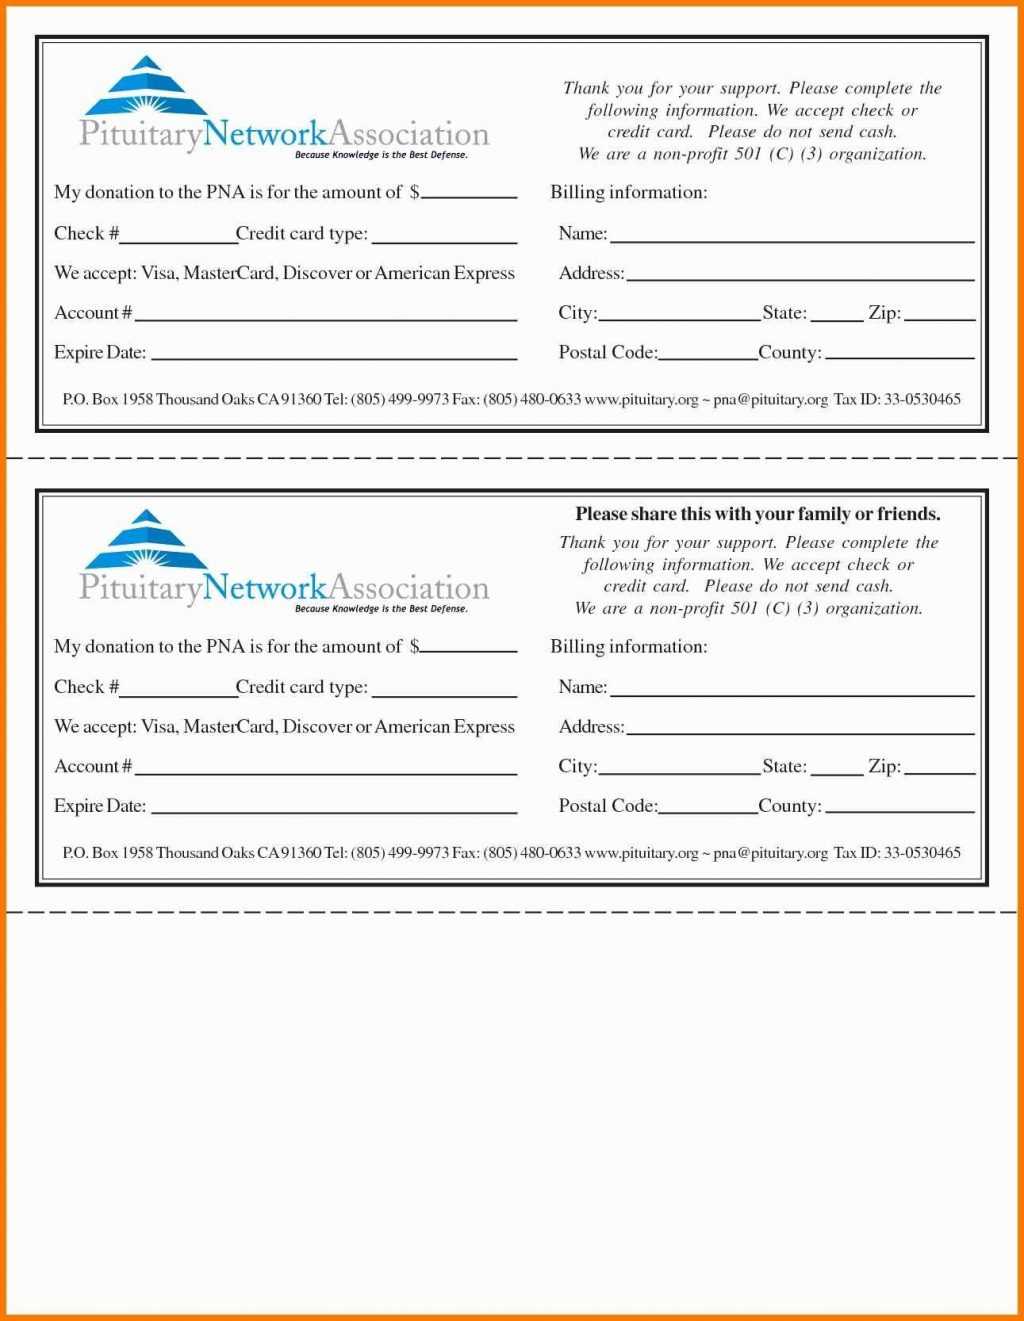 Donation Pledge Form Template Free Excel | Josiessteakhouse With Regard To Fundraising Pledge Card Template